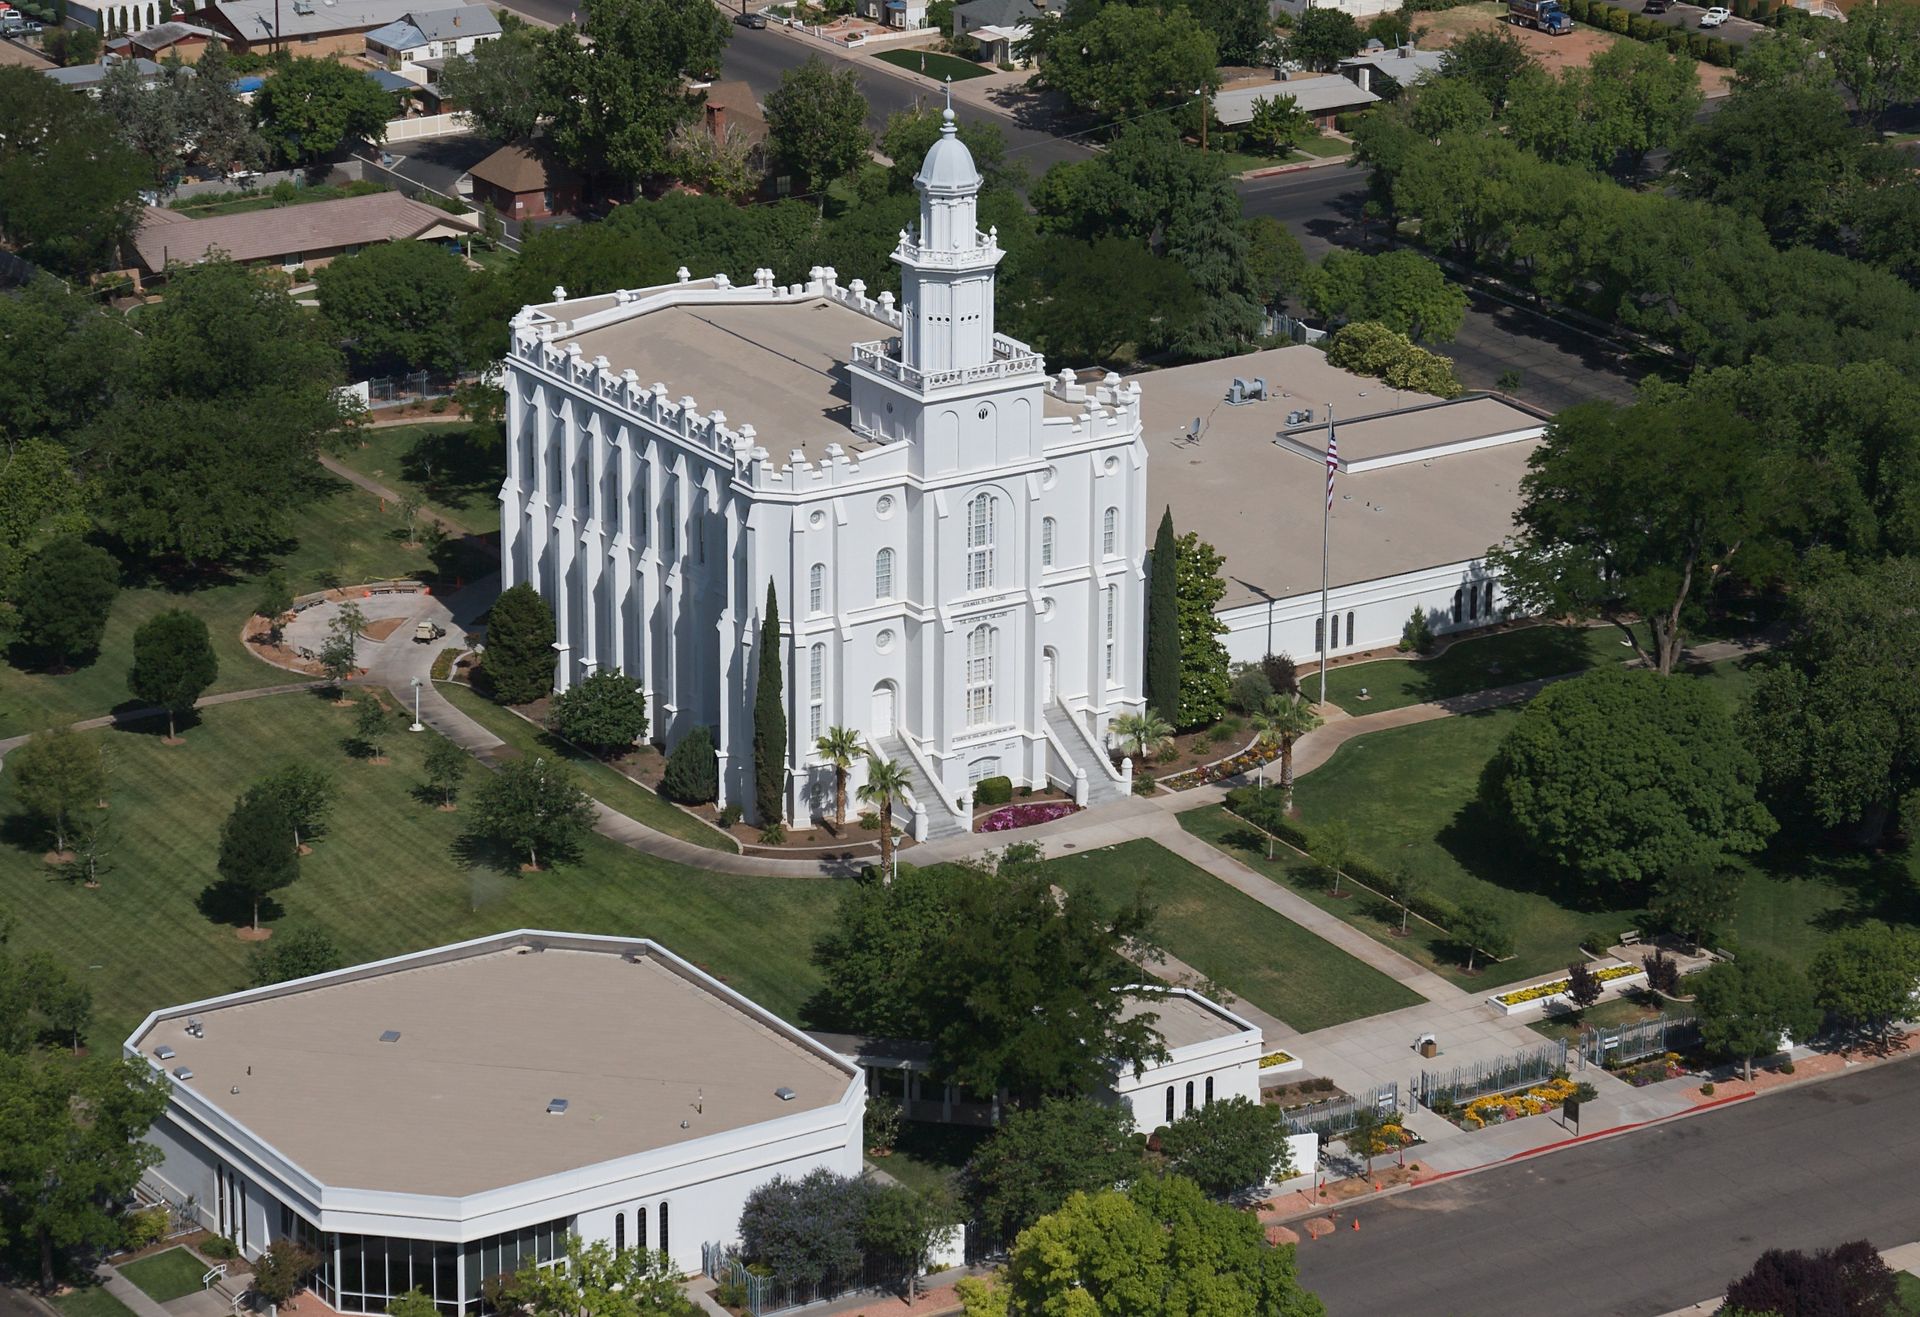 The entire St. George Utah Temple, including the entrance and scenery.